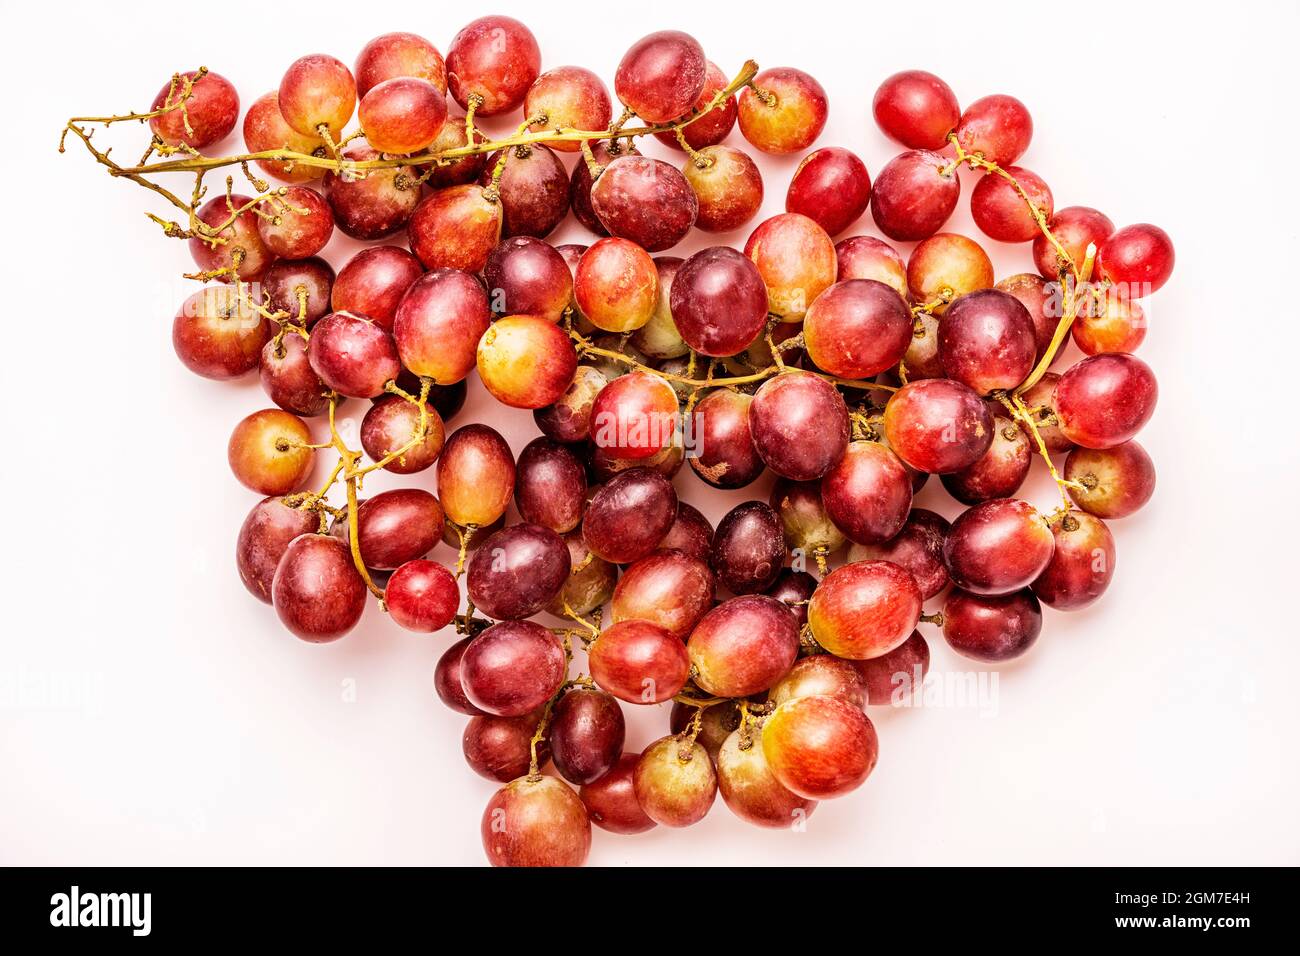 Several bunches of ripe and clean claret color dessert grapes on white table Stock Photo